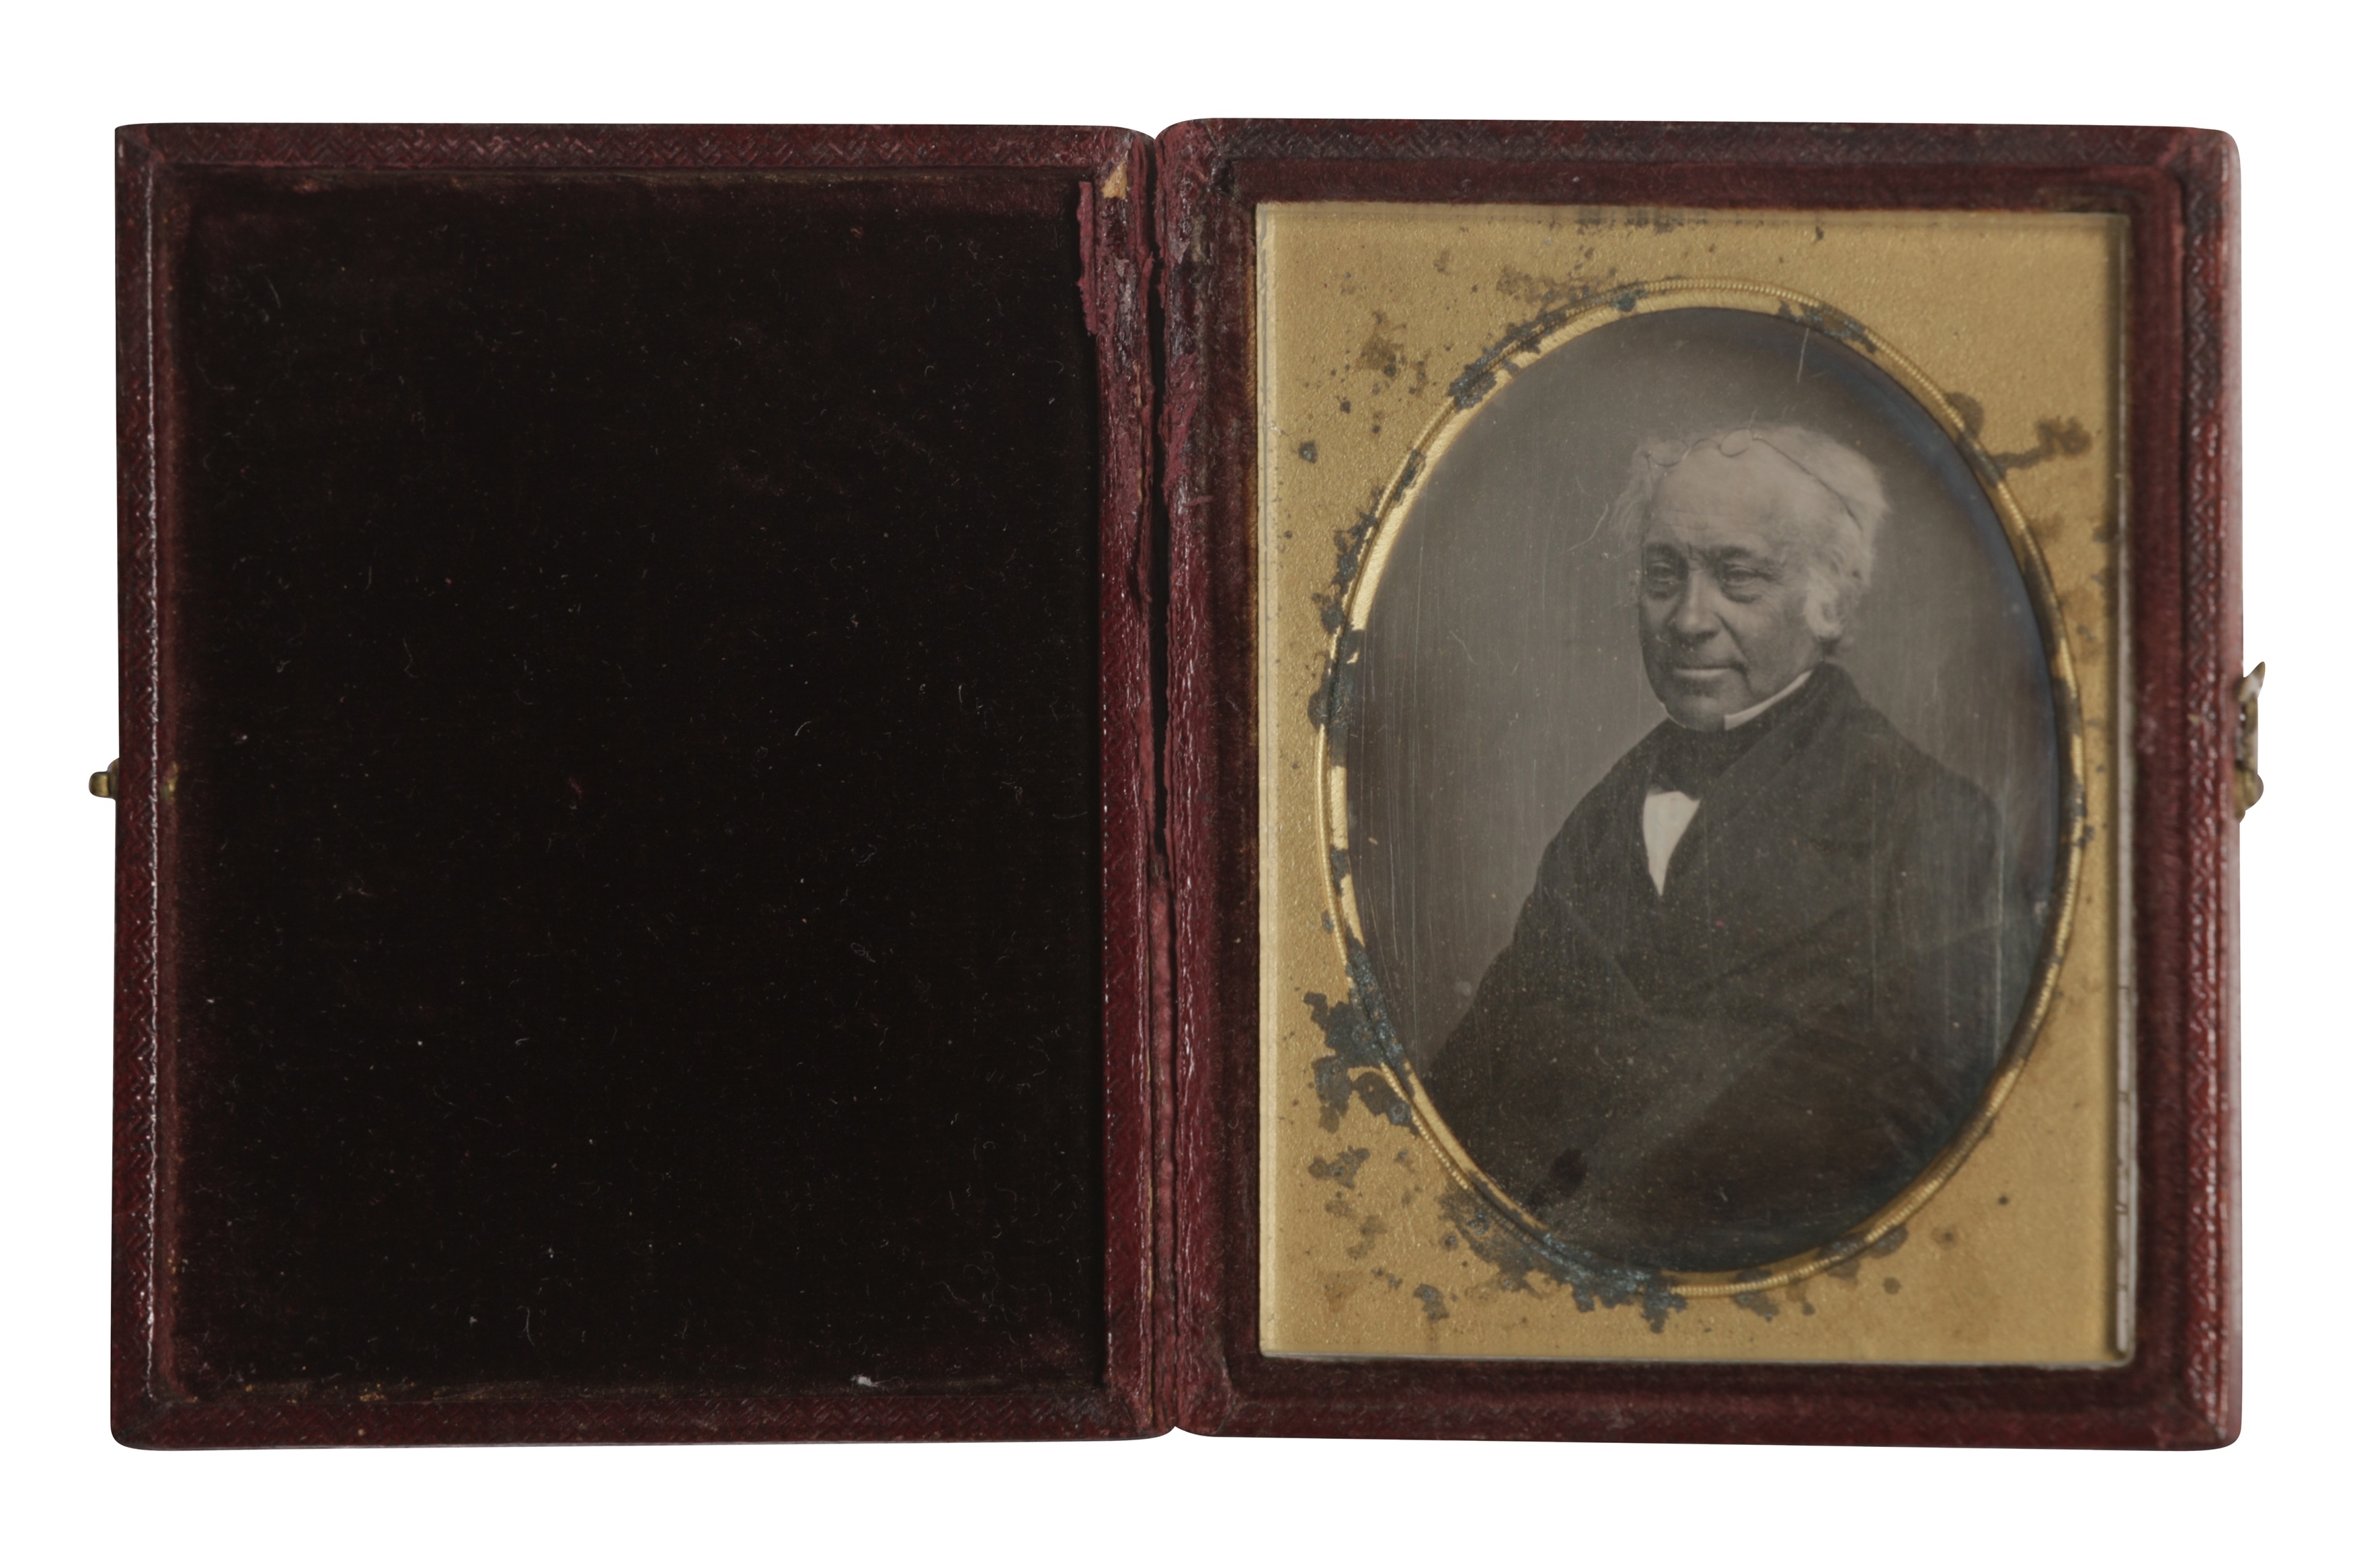 Artwork by William Edward Kilburn, A SELECTION OF DAGUERREOTYPE PORTRAITS, Made of ink on piece of paper